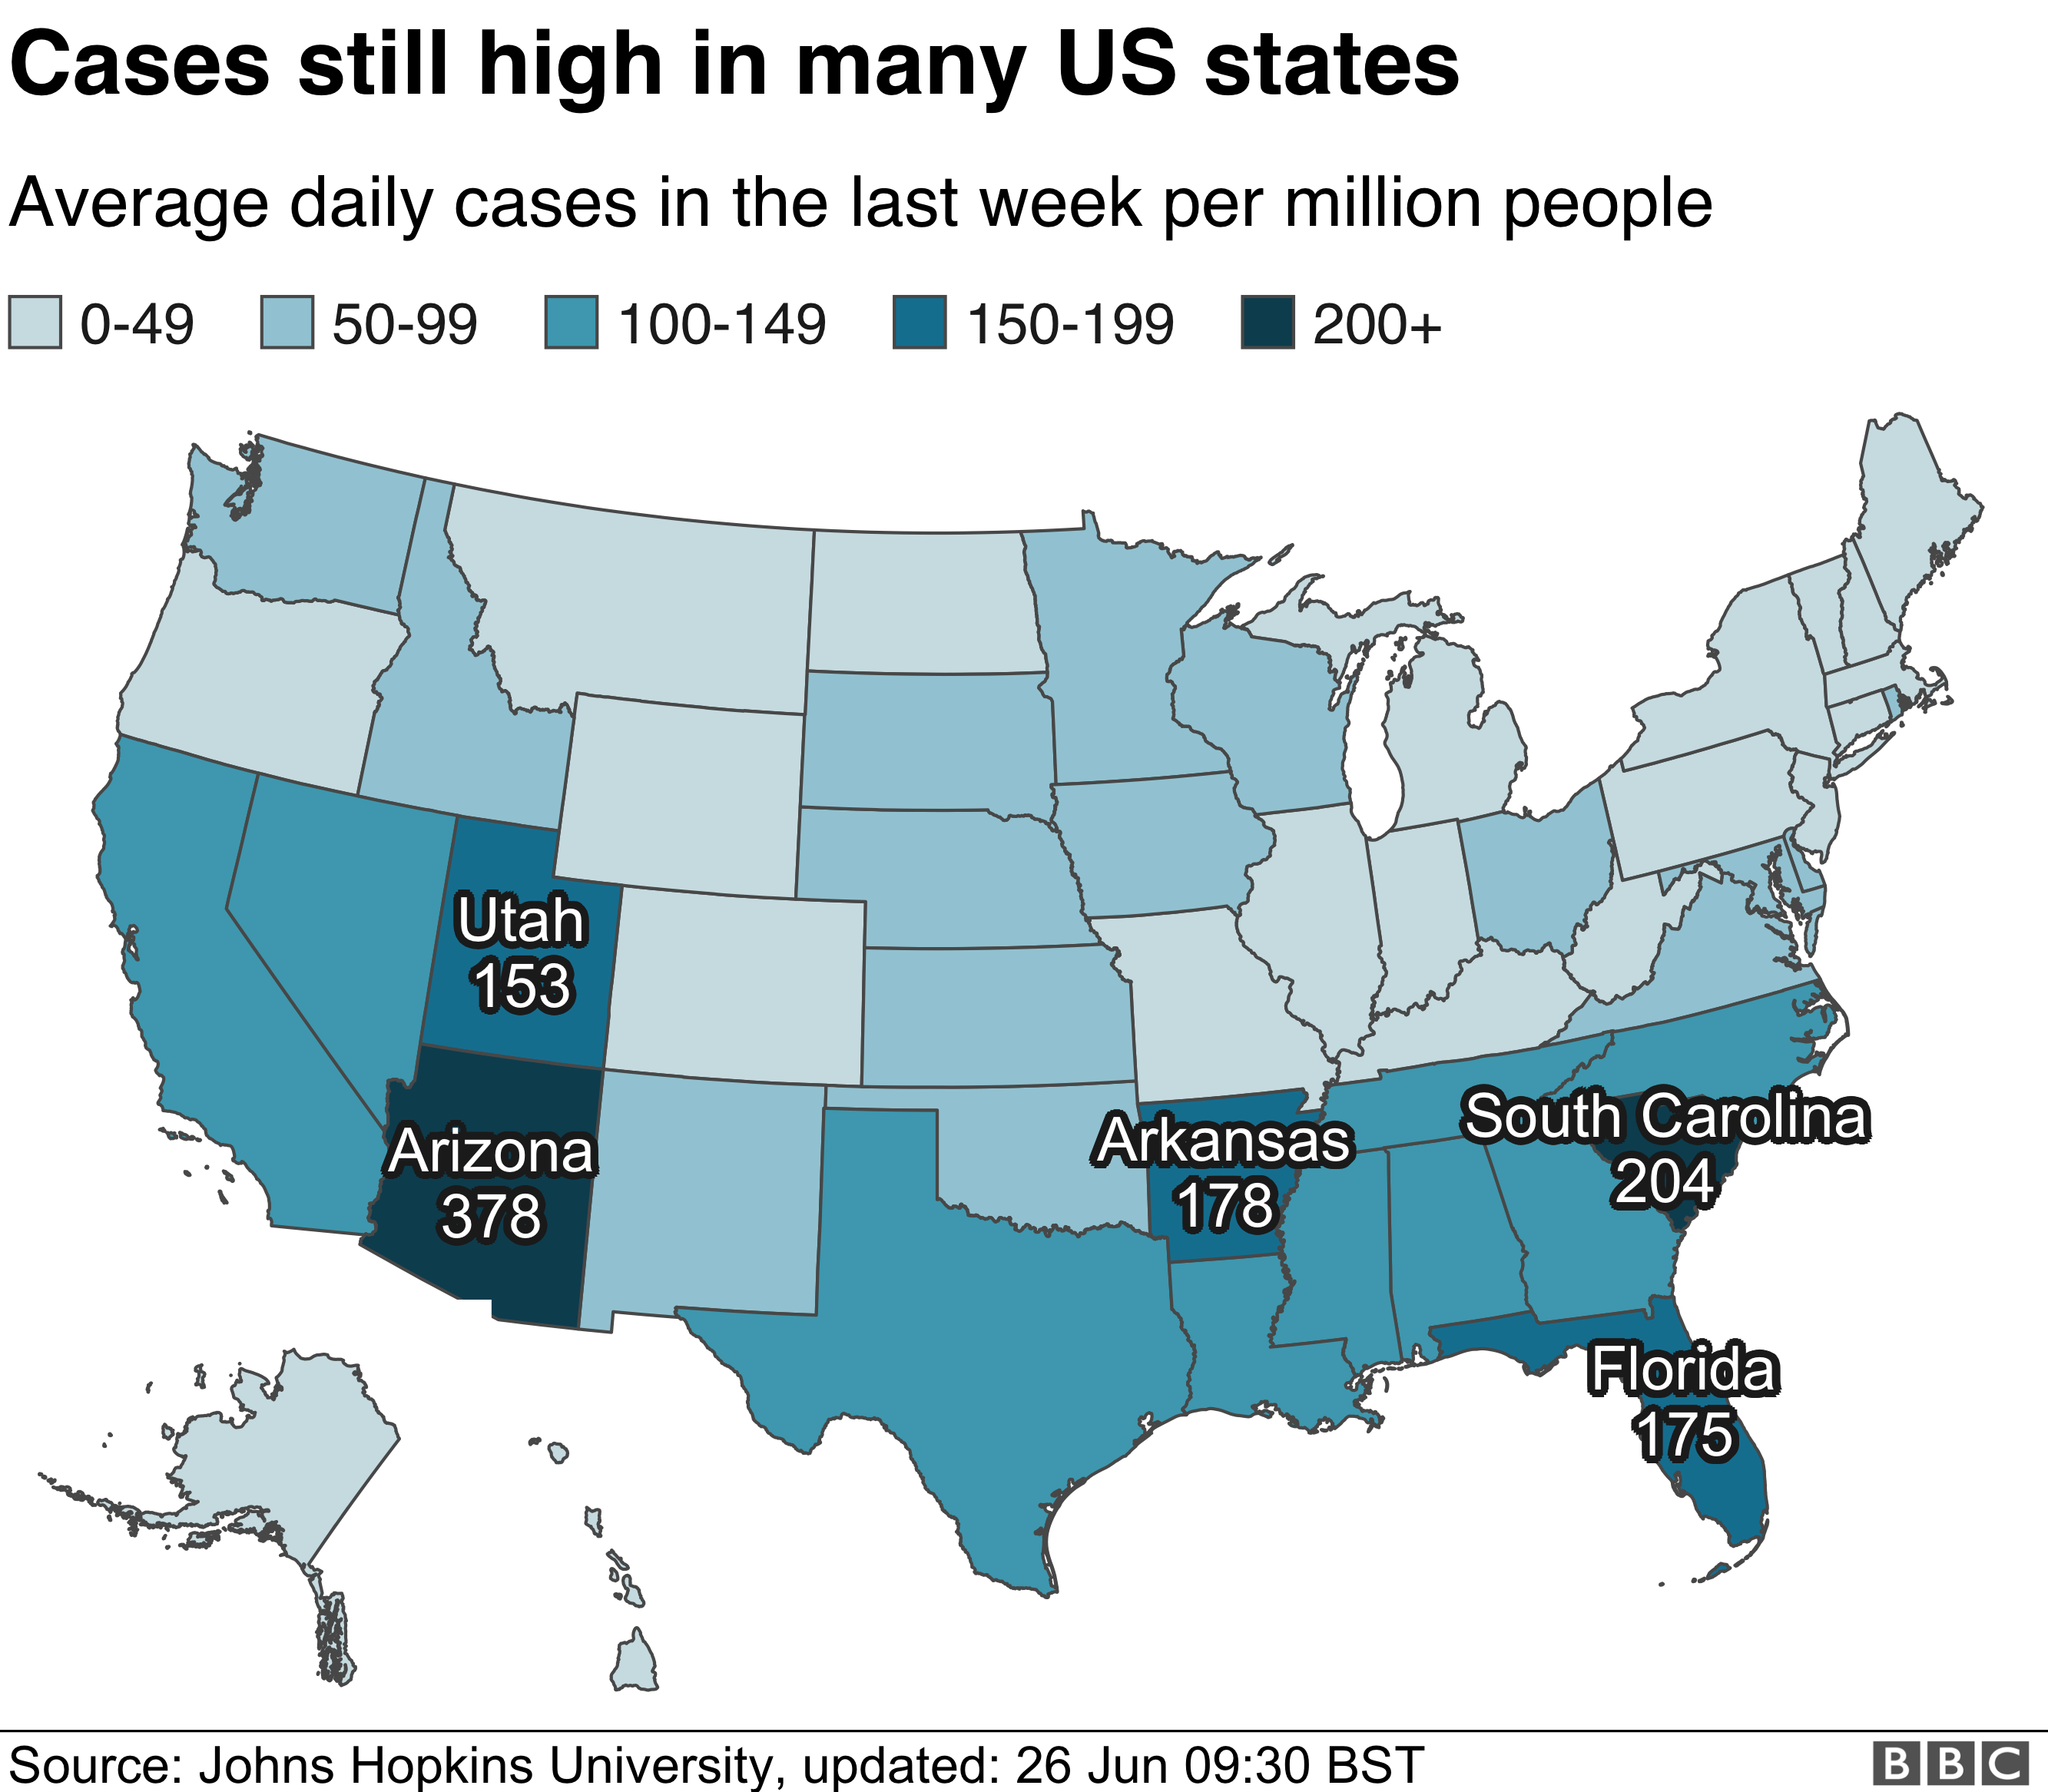 Map showing states with a high number of average weekly cases per million people